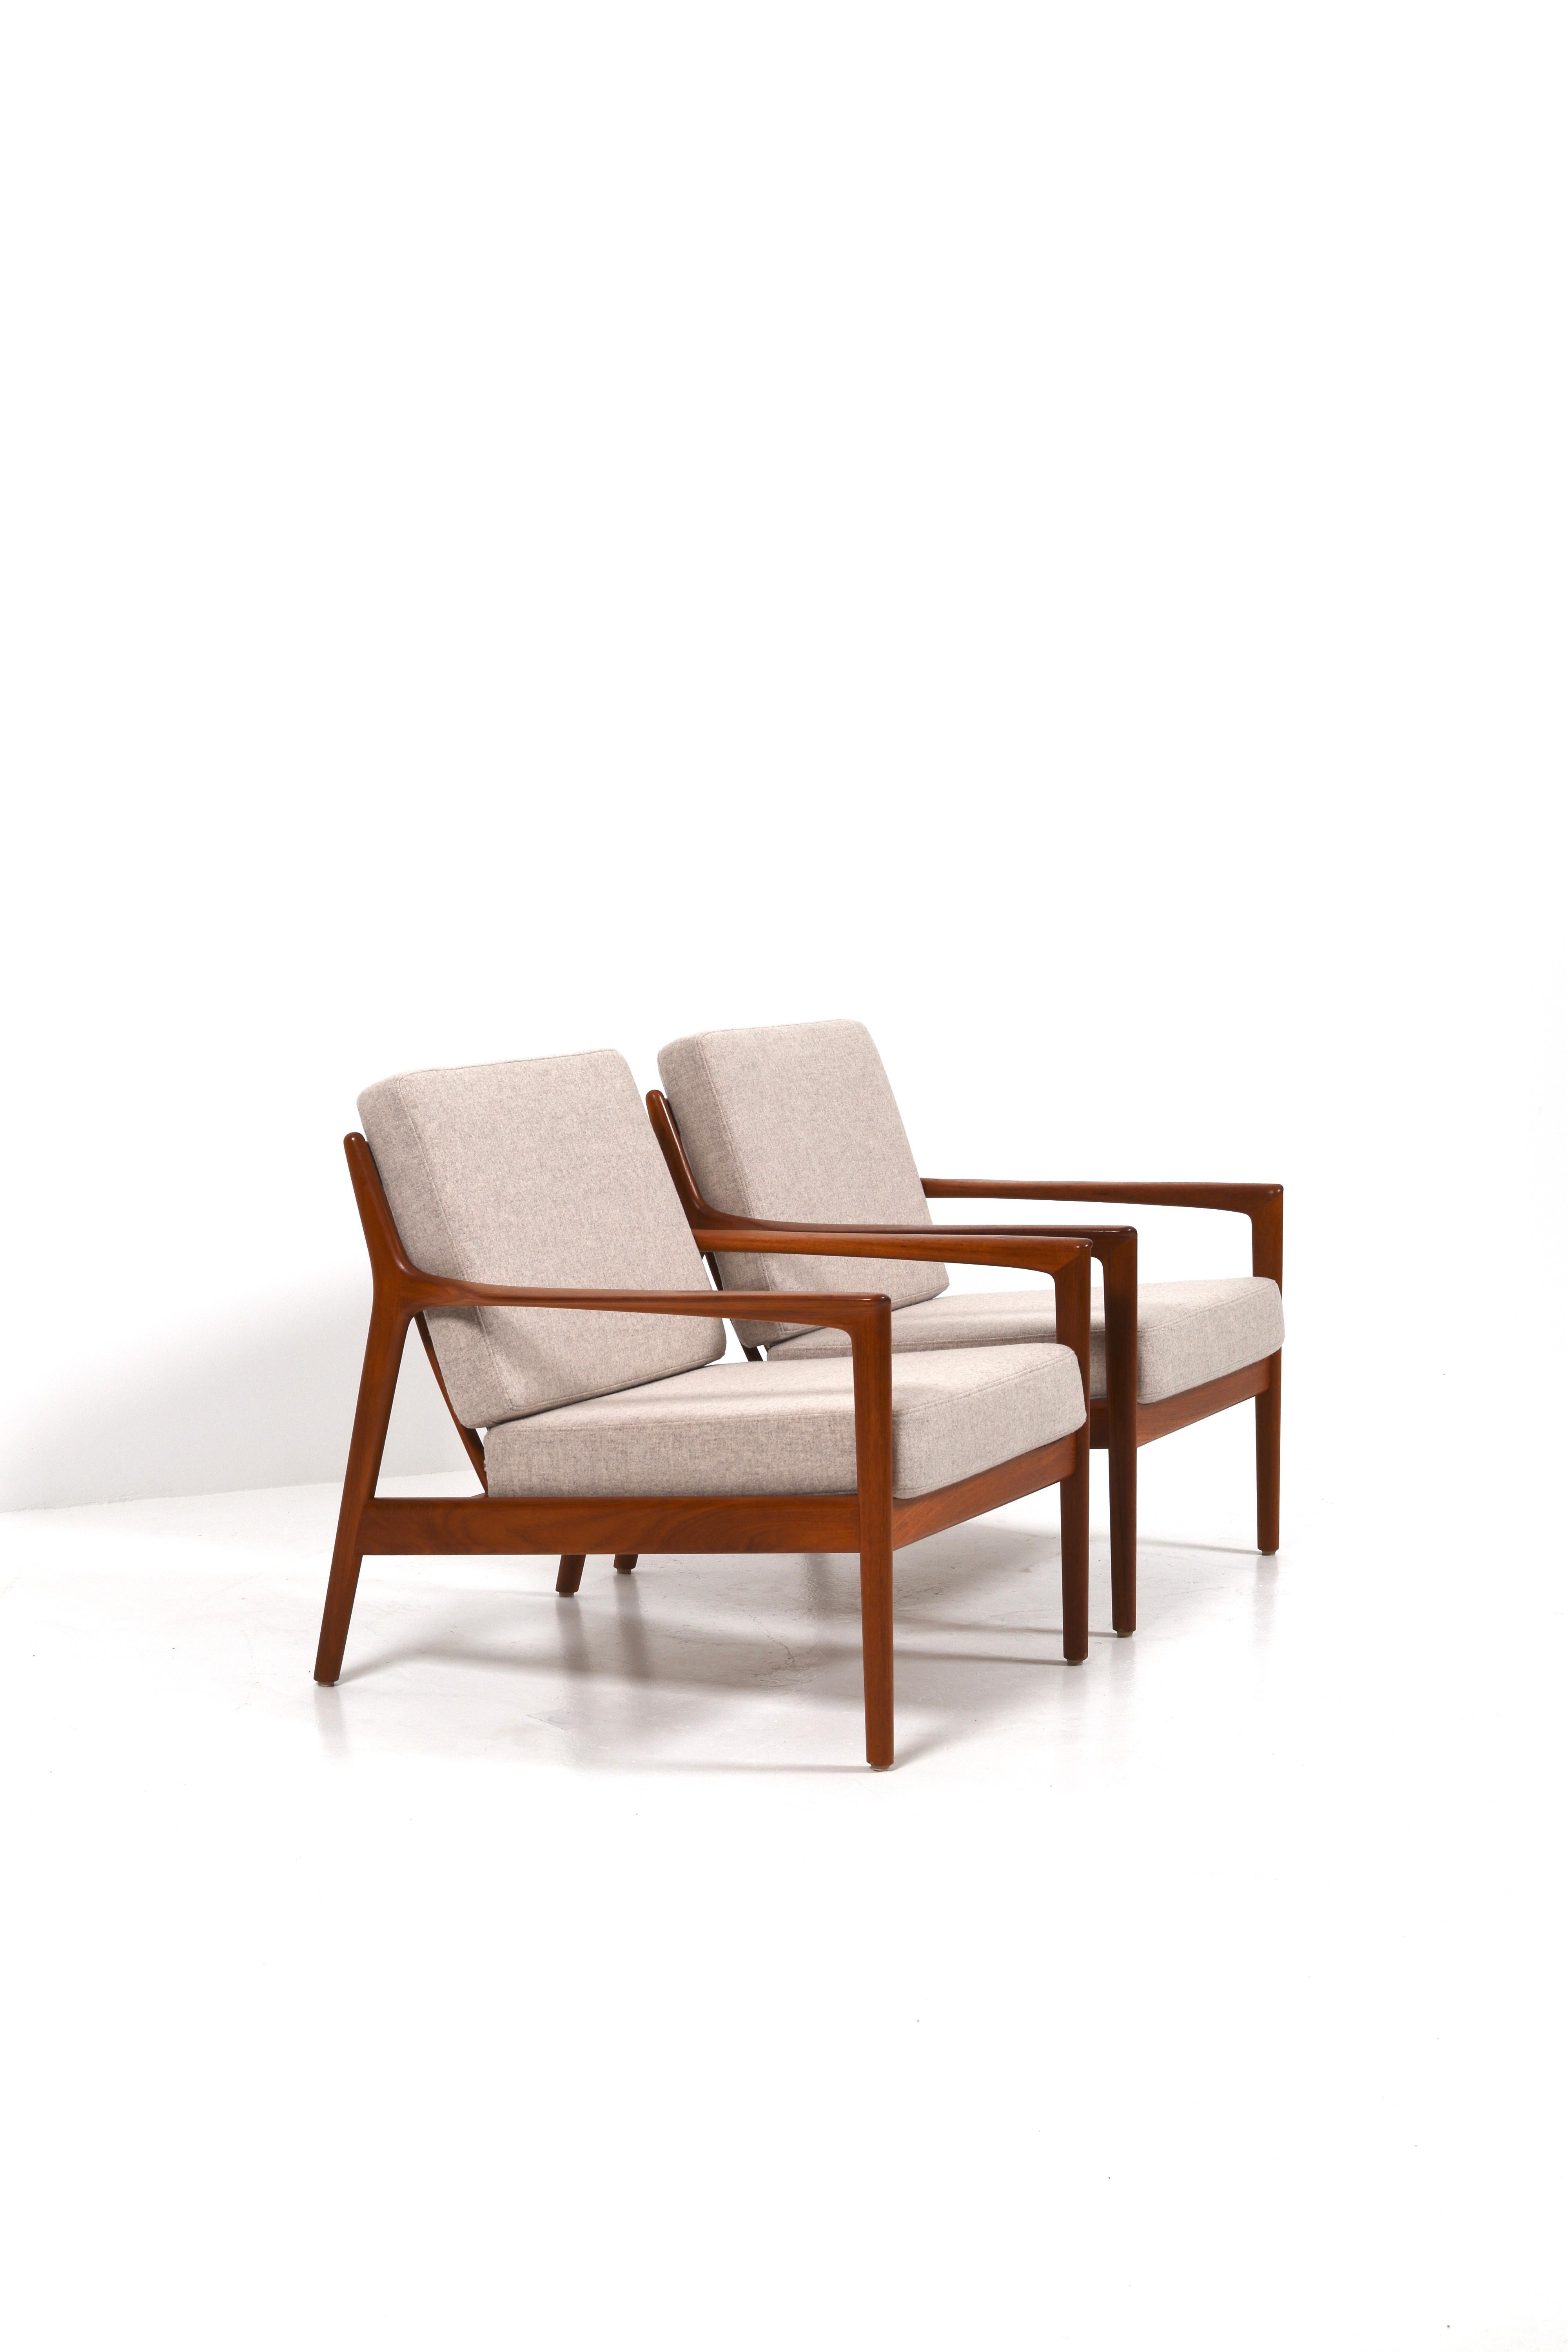 Pair of “USA 75” Teak Lounge Chairs by Folke Ohlsson for DUX, Sweden, 1960s For Sale 2